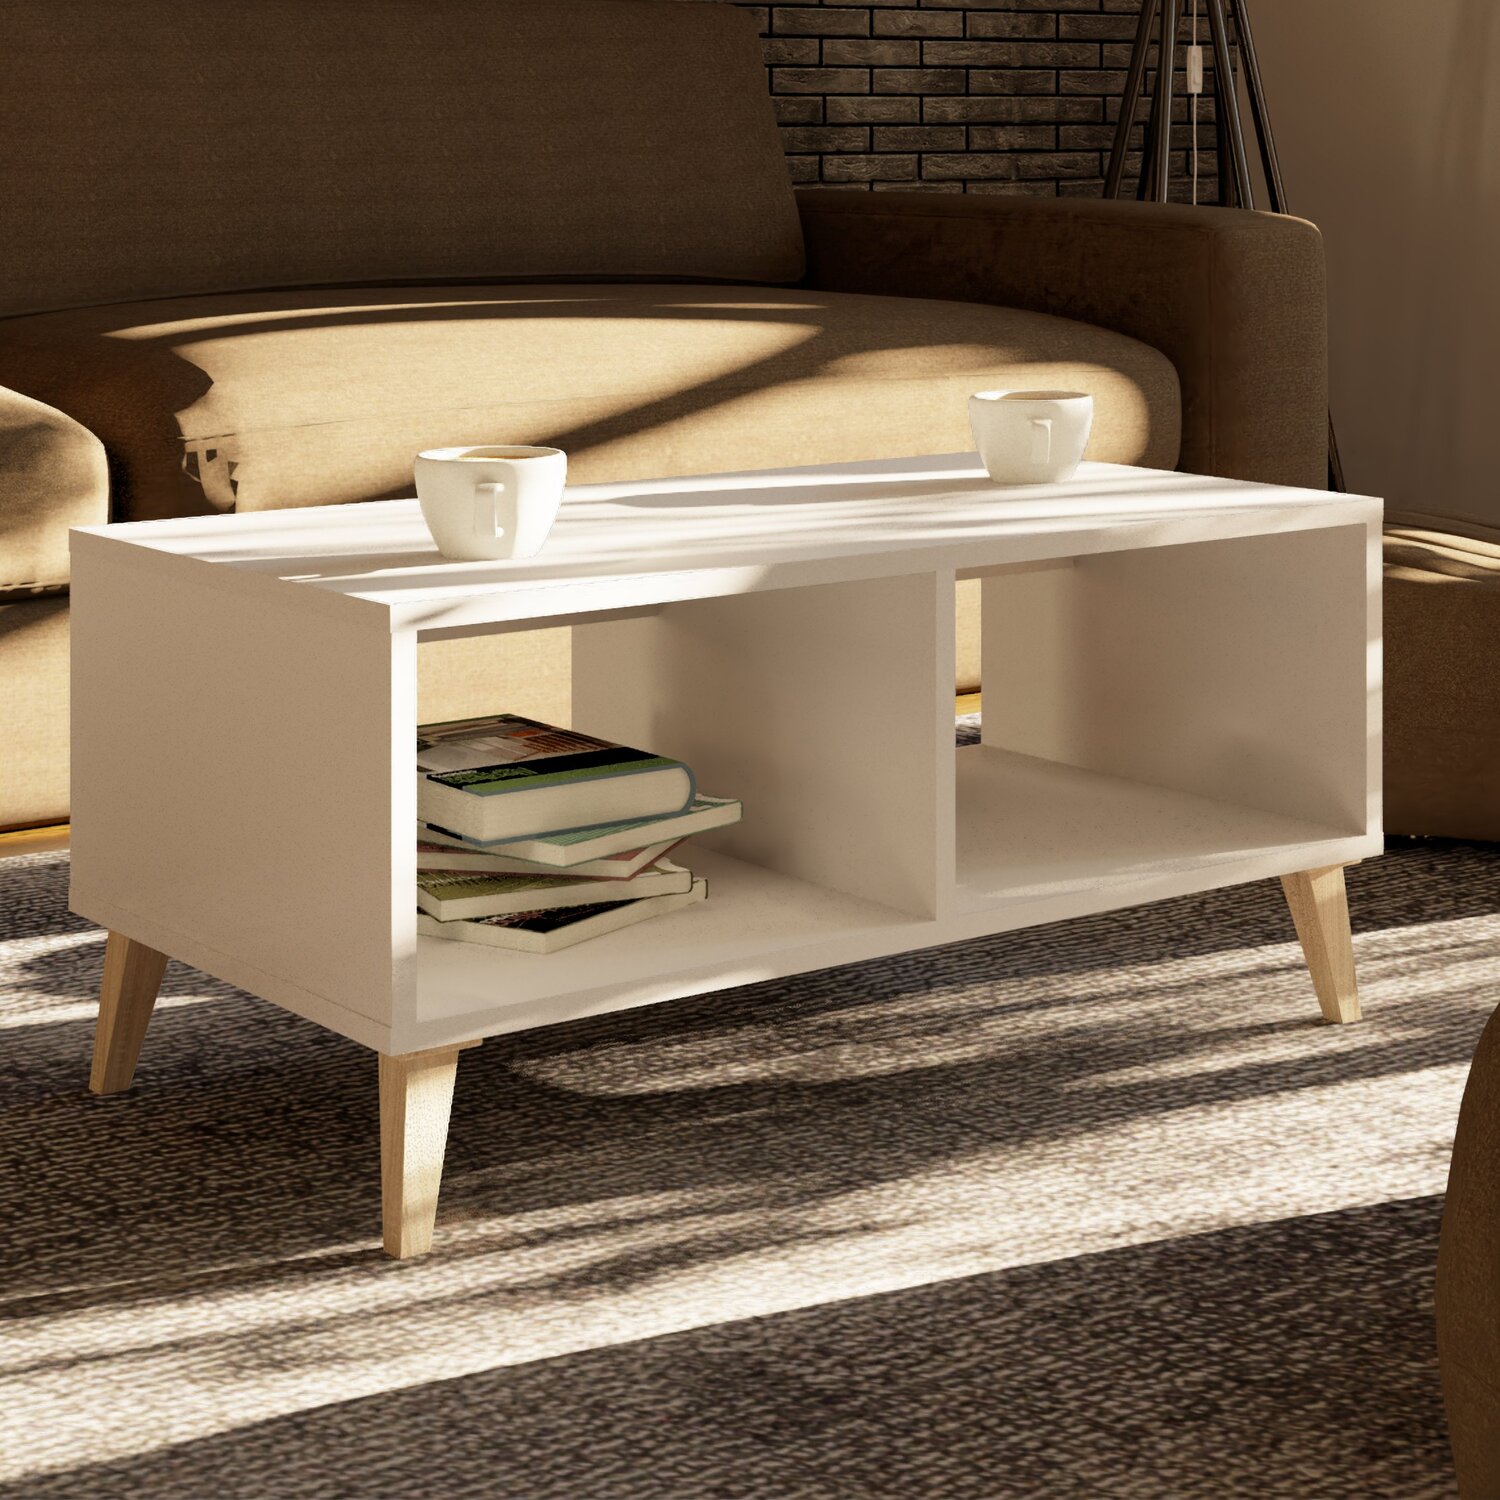 Kingston White Coffee Table with Shelves Image